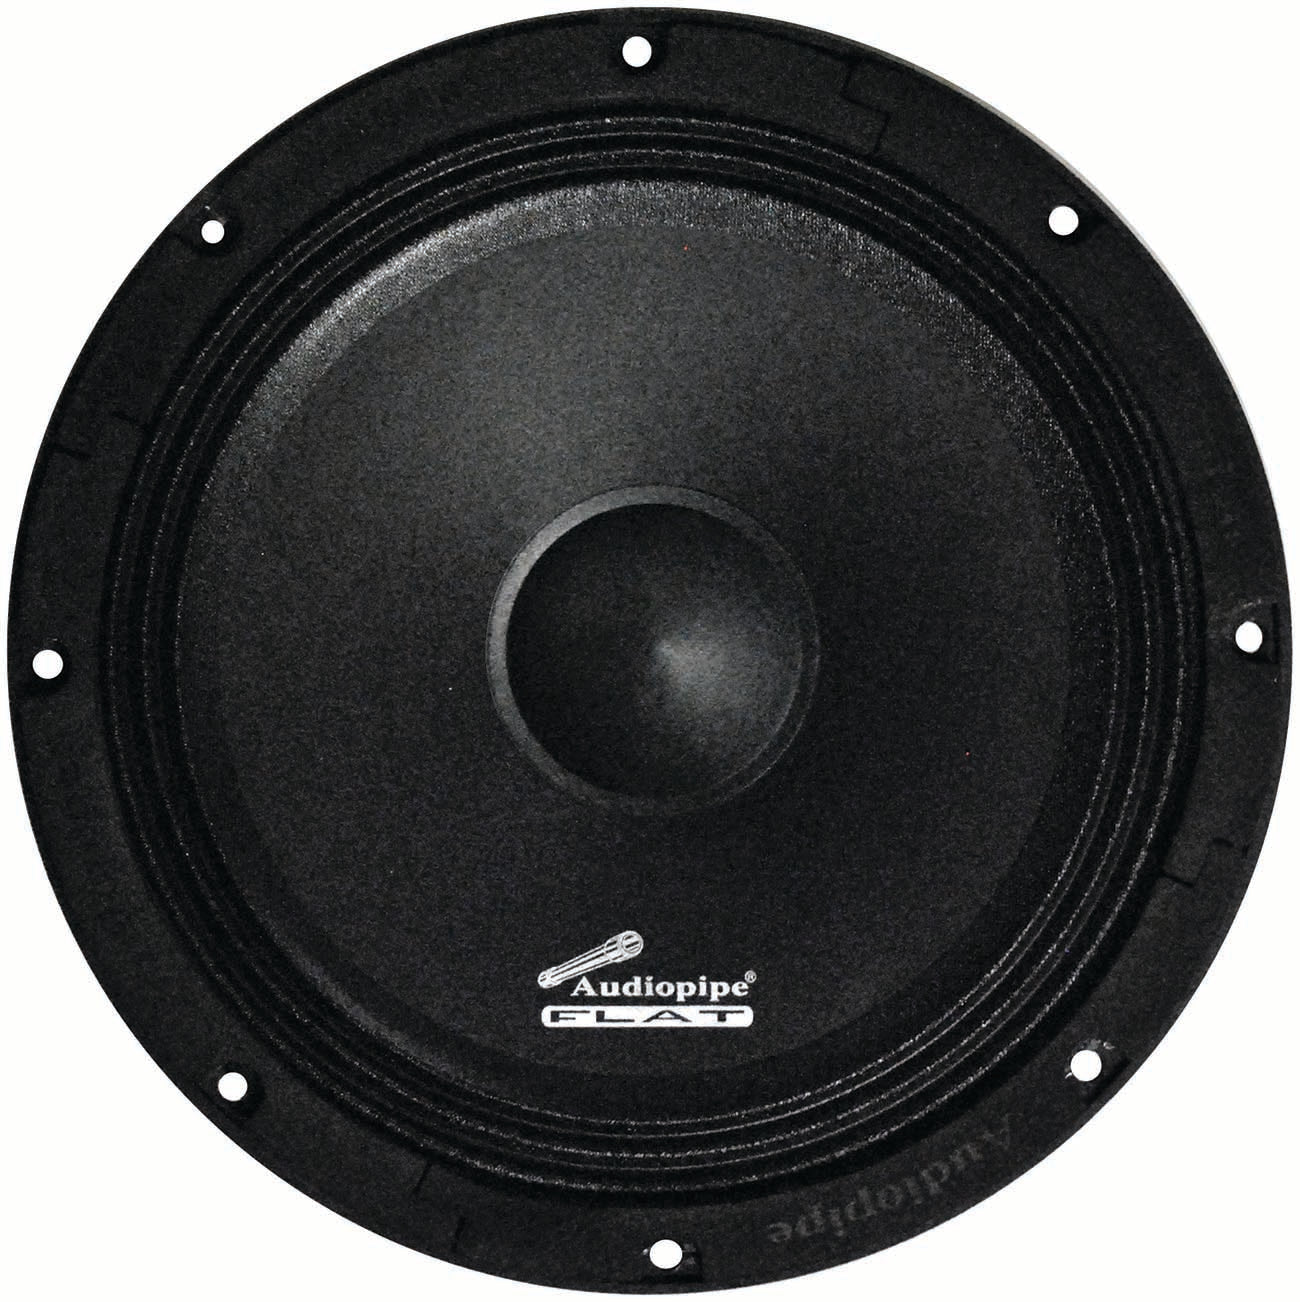 Audiopipe 8" Shallow Mount Low Mid Frequency Speaker(sold Each) 300w Max